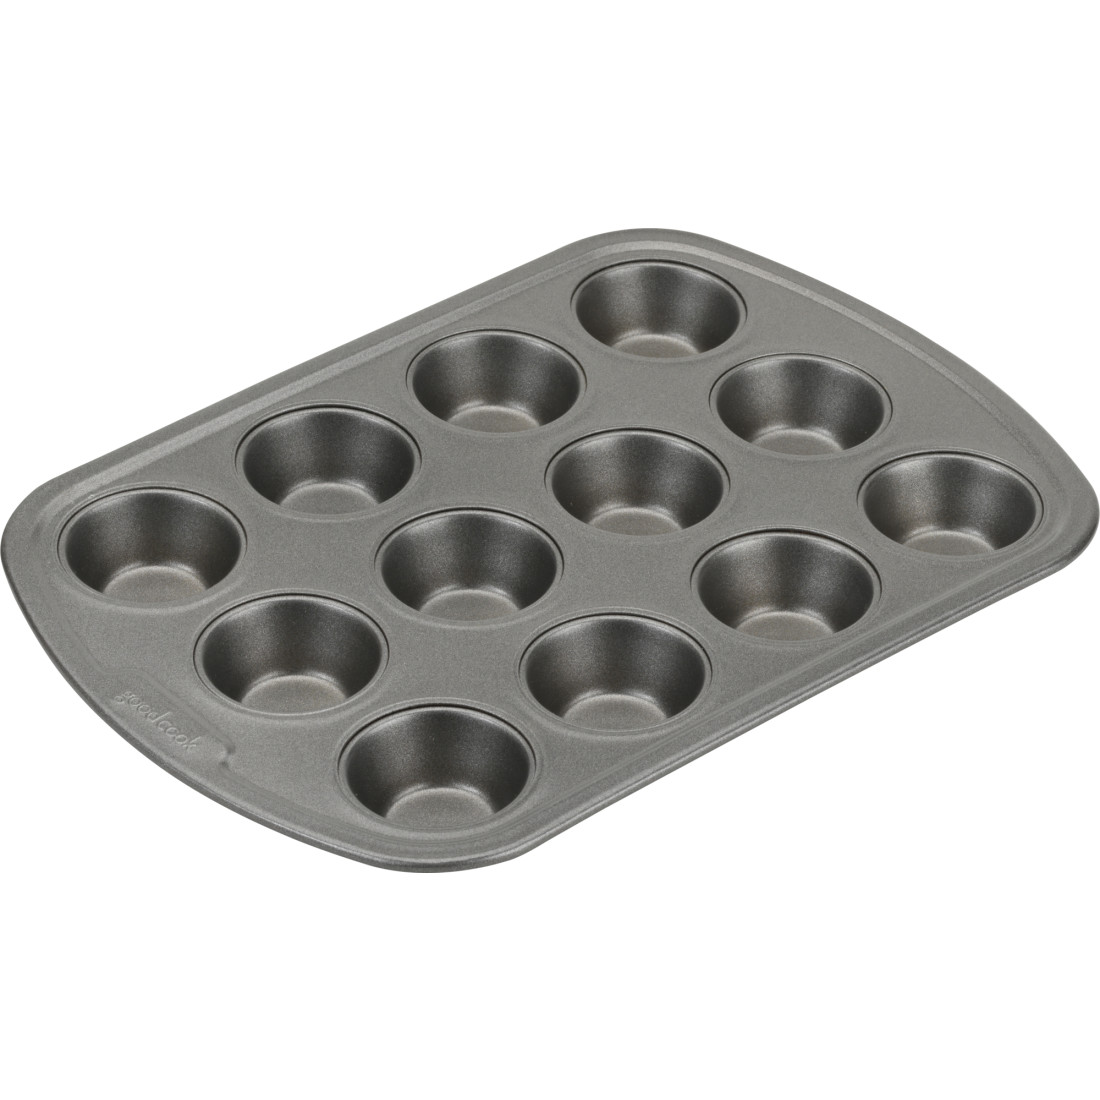 Goodcook Non-stick Muffin Pan,12 Cup : Target